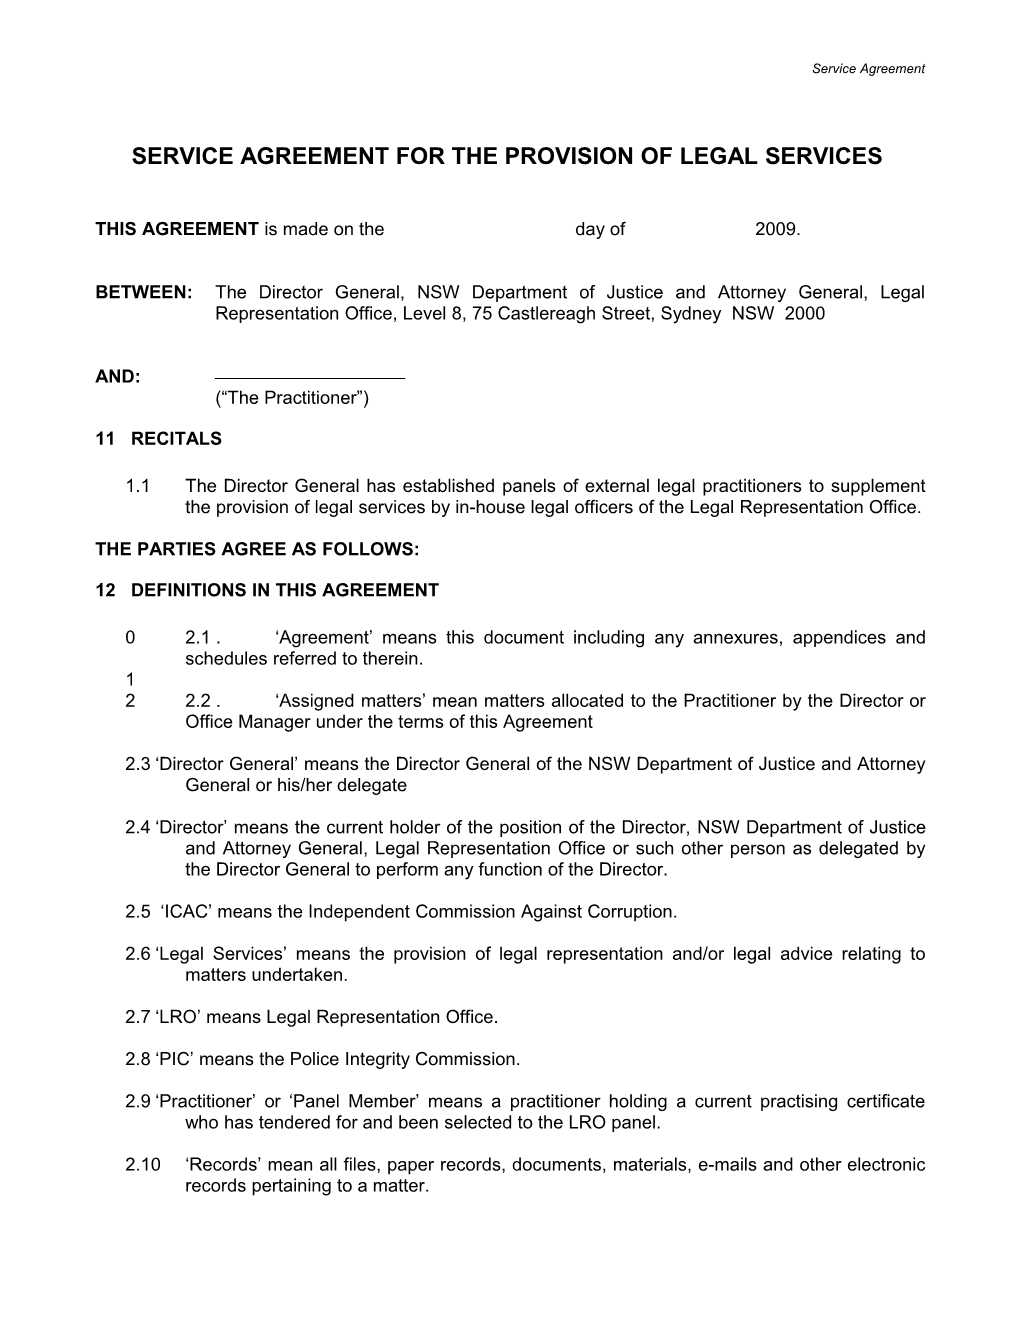 Service Agreement for the Provision of Legal Services